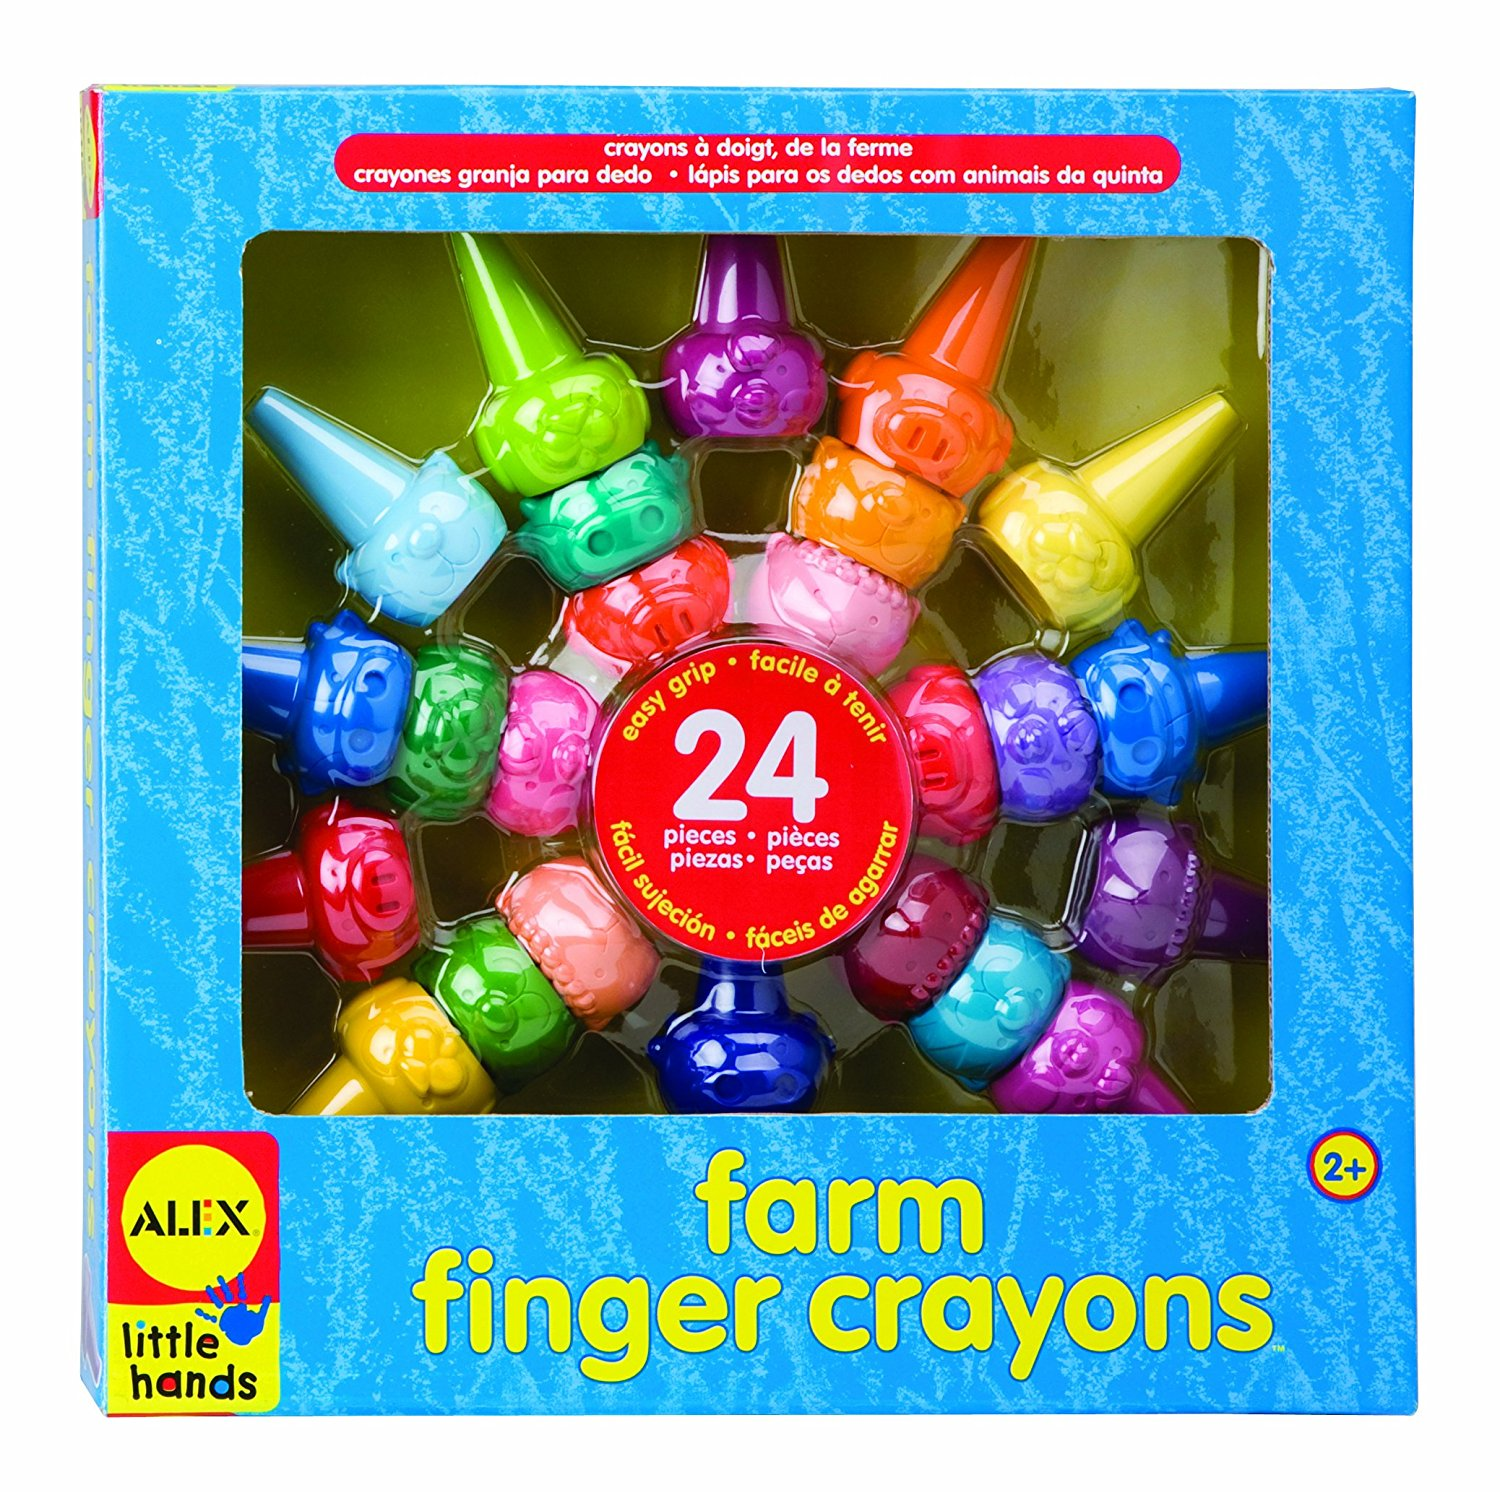 ALEX Toys Little Hands Farm Finger Crayons 24 Set Only $6.20! (Add-On Item)